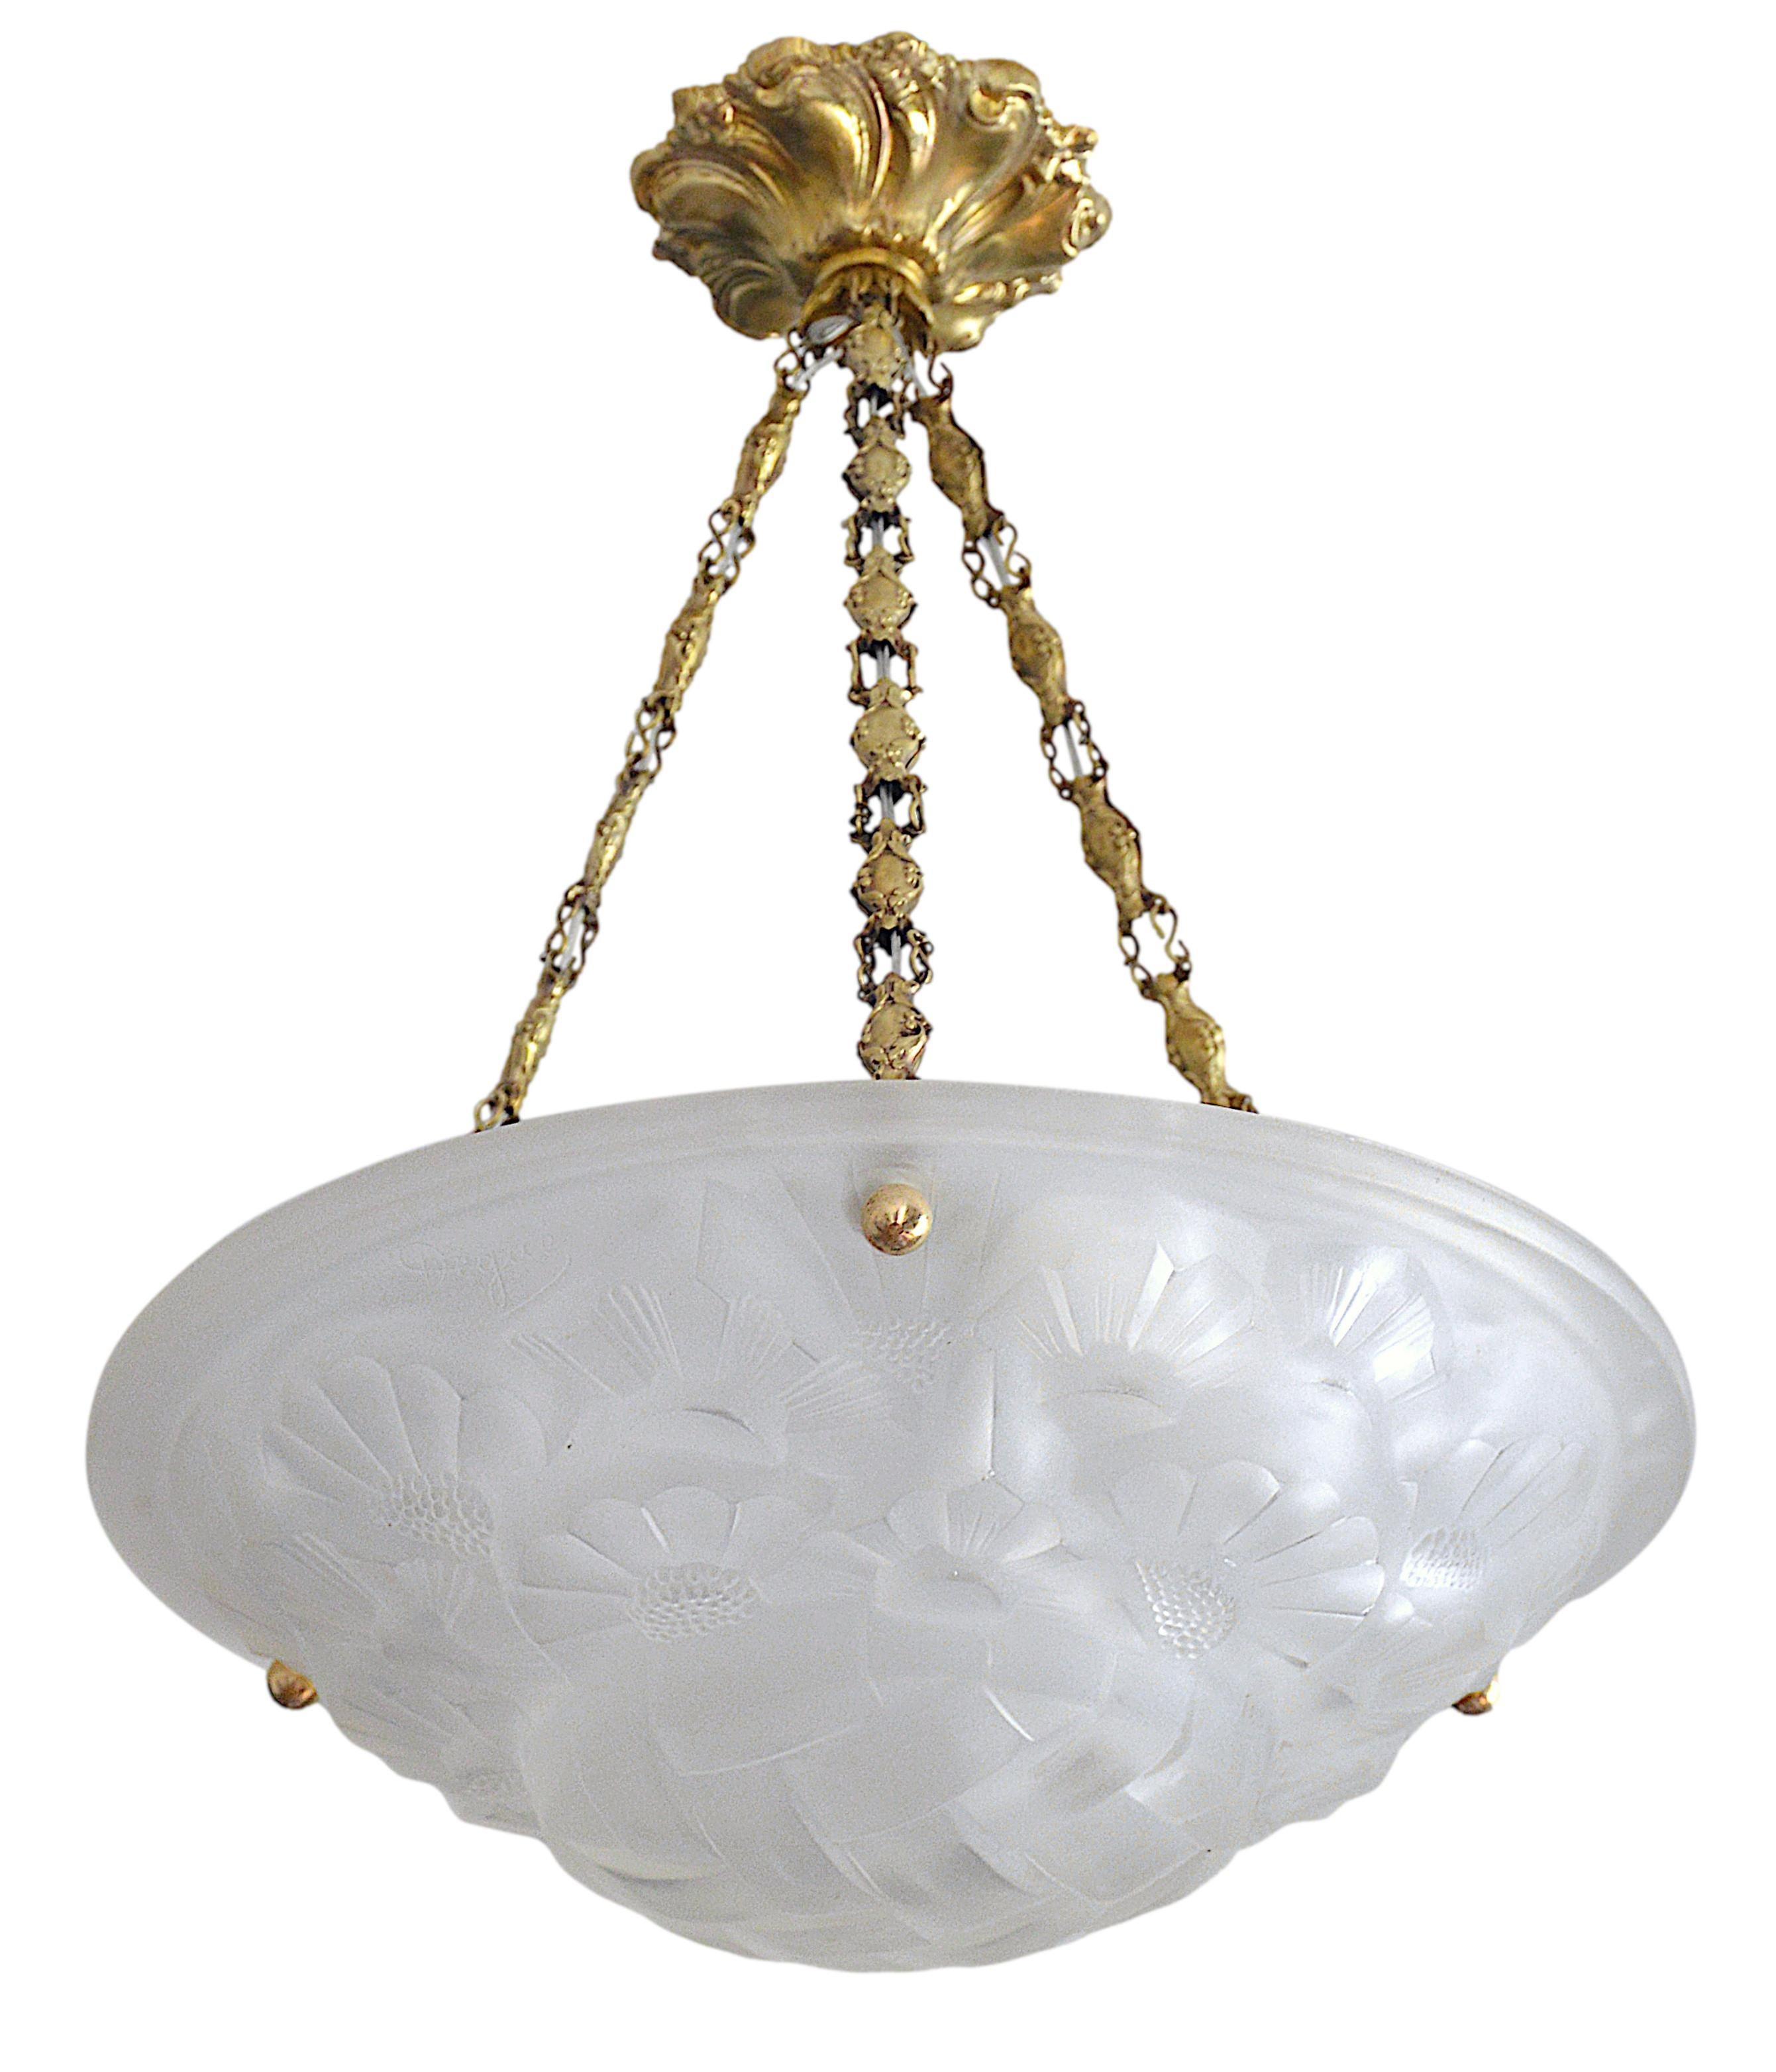 French Art Deco pair of pendants chandeliers by Degue (Compiegne), France, ca. 1930. White frosted glass shade with an Art Deco stylized floral pattern. Stamped brass frame. Height: 17.7